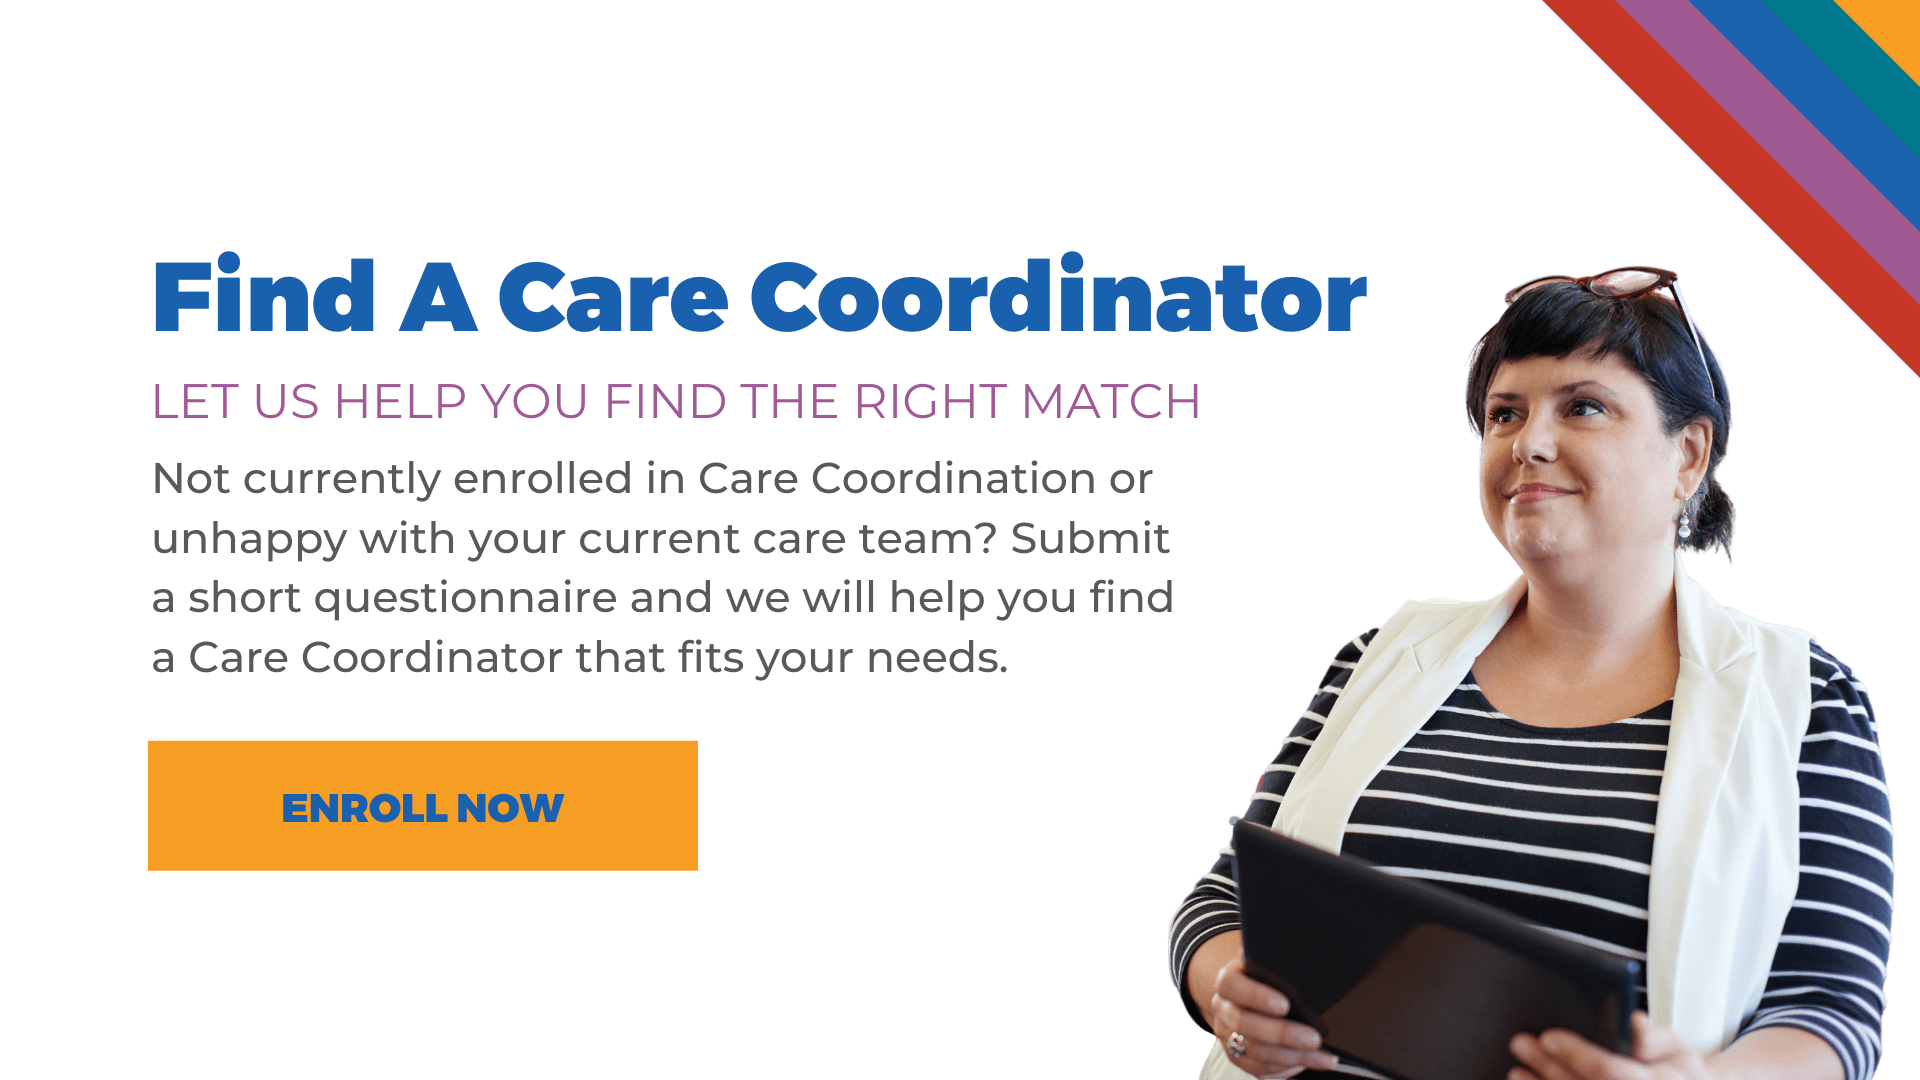 Find a care coordinator. Let us help you find the right match. Not currently enrolled in care coordination, or are you unhappy with your current care team? Submit a short questionnaire and we will help you find a care coordinator that fits your needs.